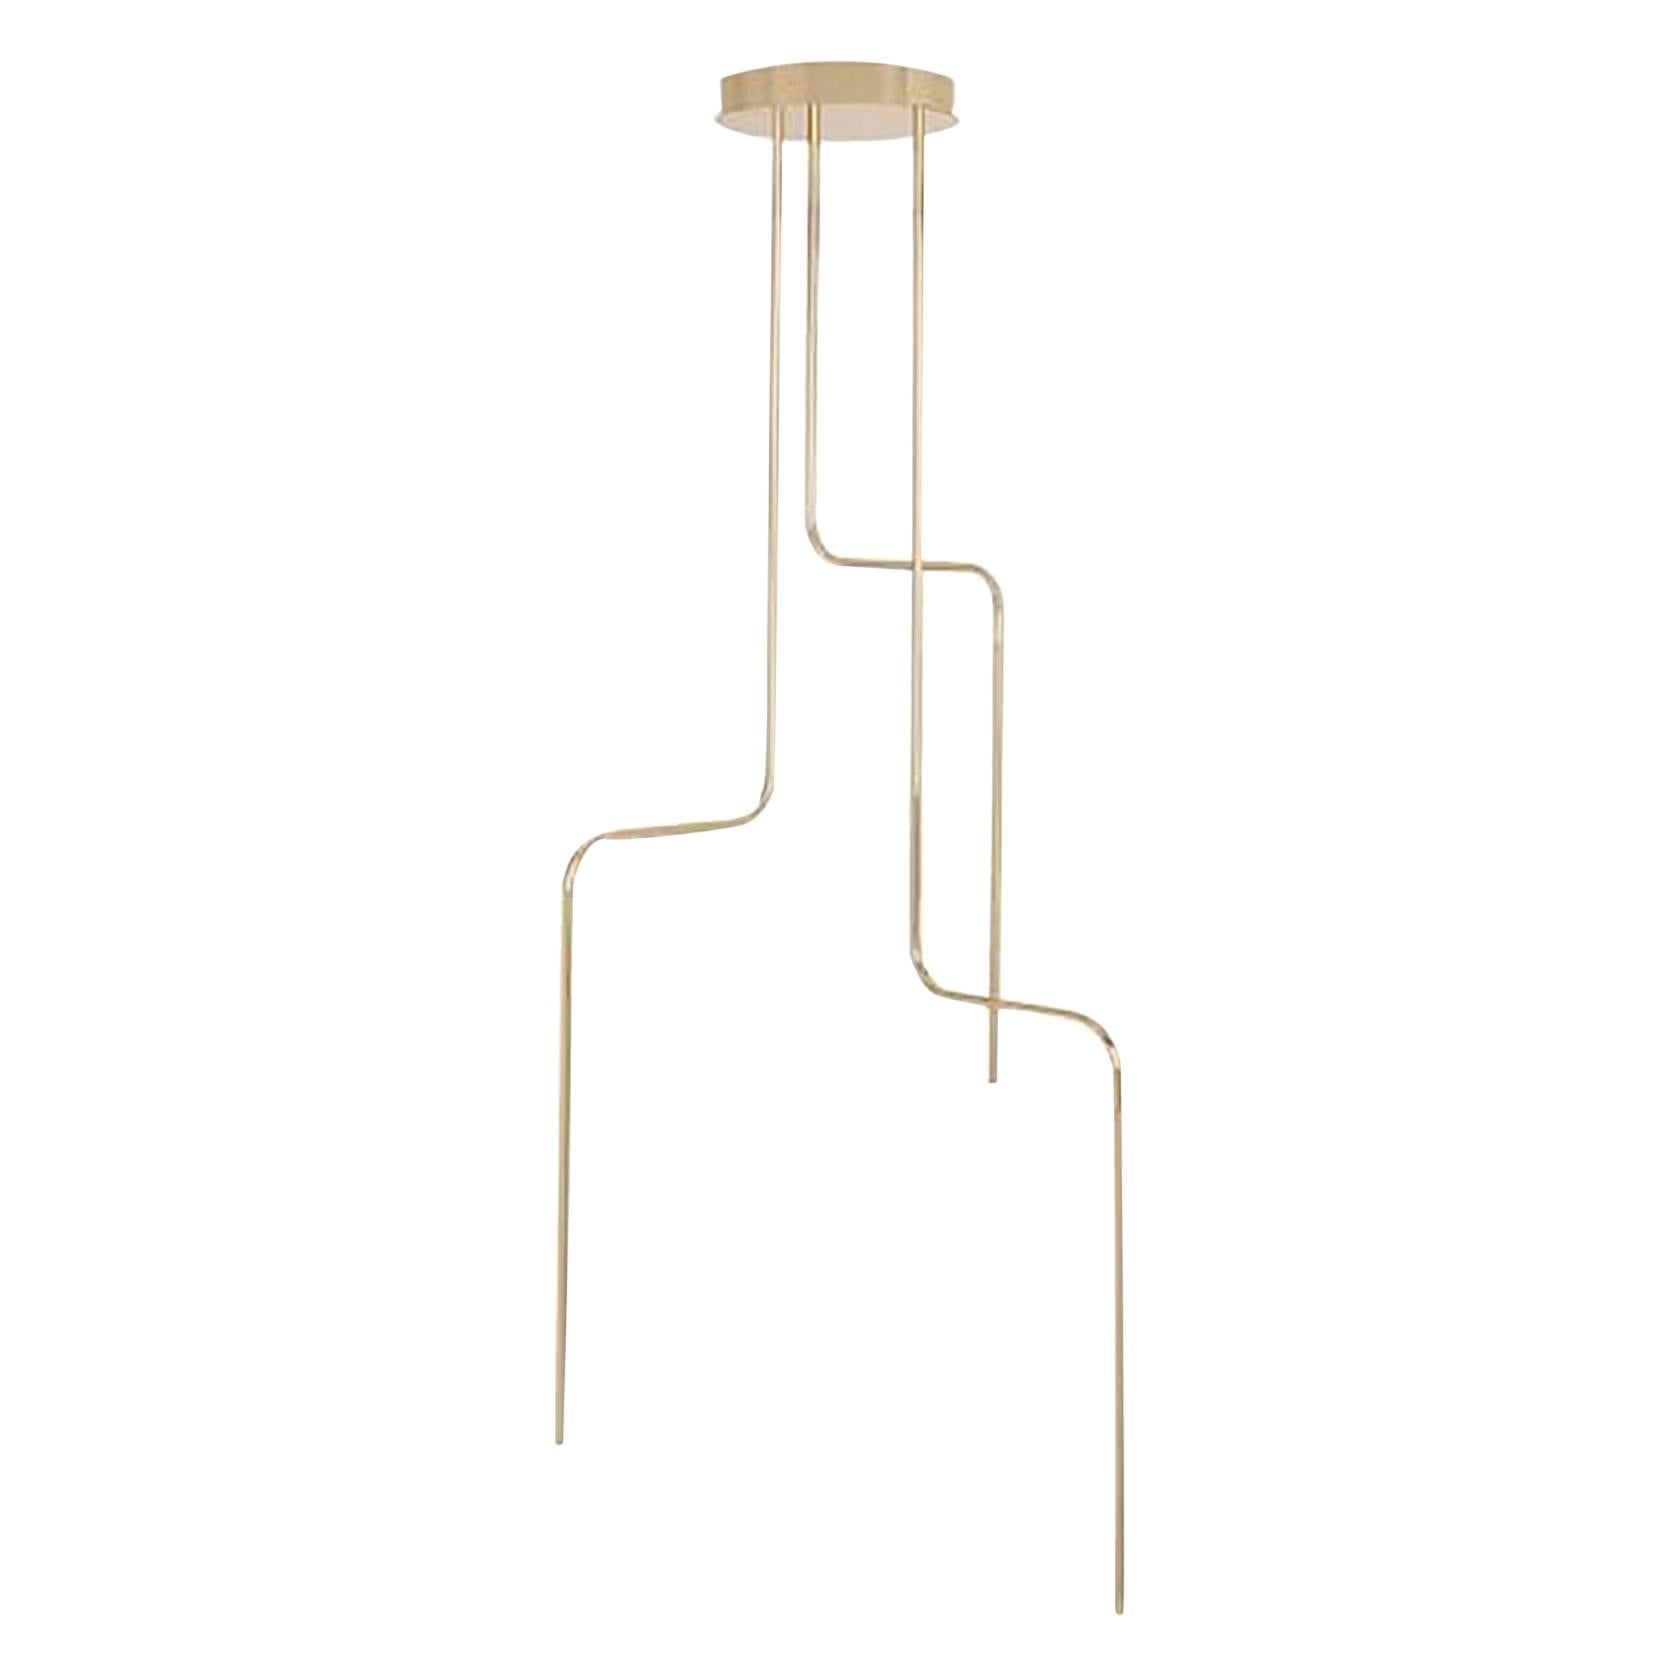 Gold Contemporary Ceiling Lamp in Tubular Brass, Led Lamp Type